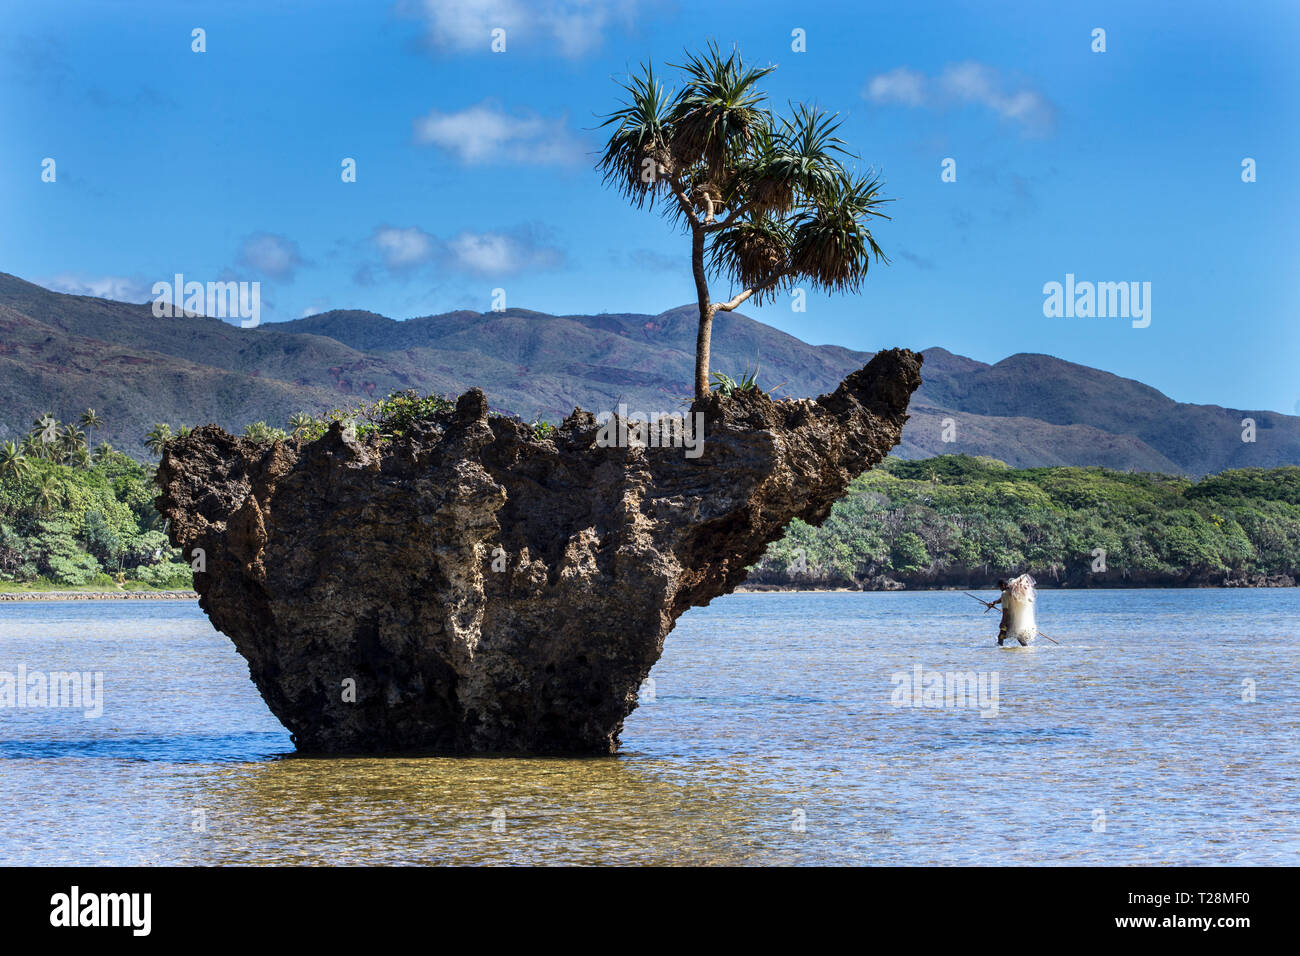 https://c8.alamy.com/comp/T28MF0/indigenous-kanak-fisherman-carrying-his-fishing-net-across-a-wave-cut-platform-at-the-mouth-of-the-yate-river-in-the-southern-lagoon-new-caledonia-T28MF0.jpg